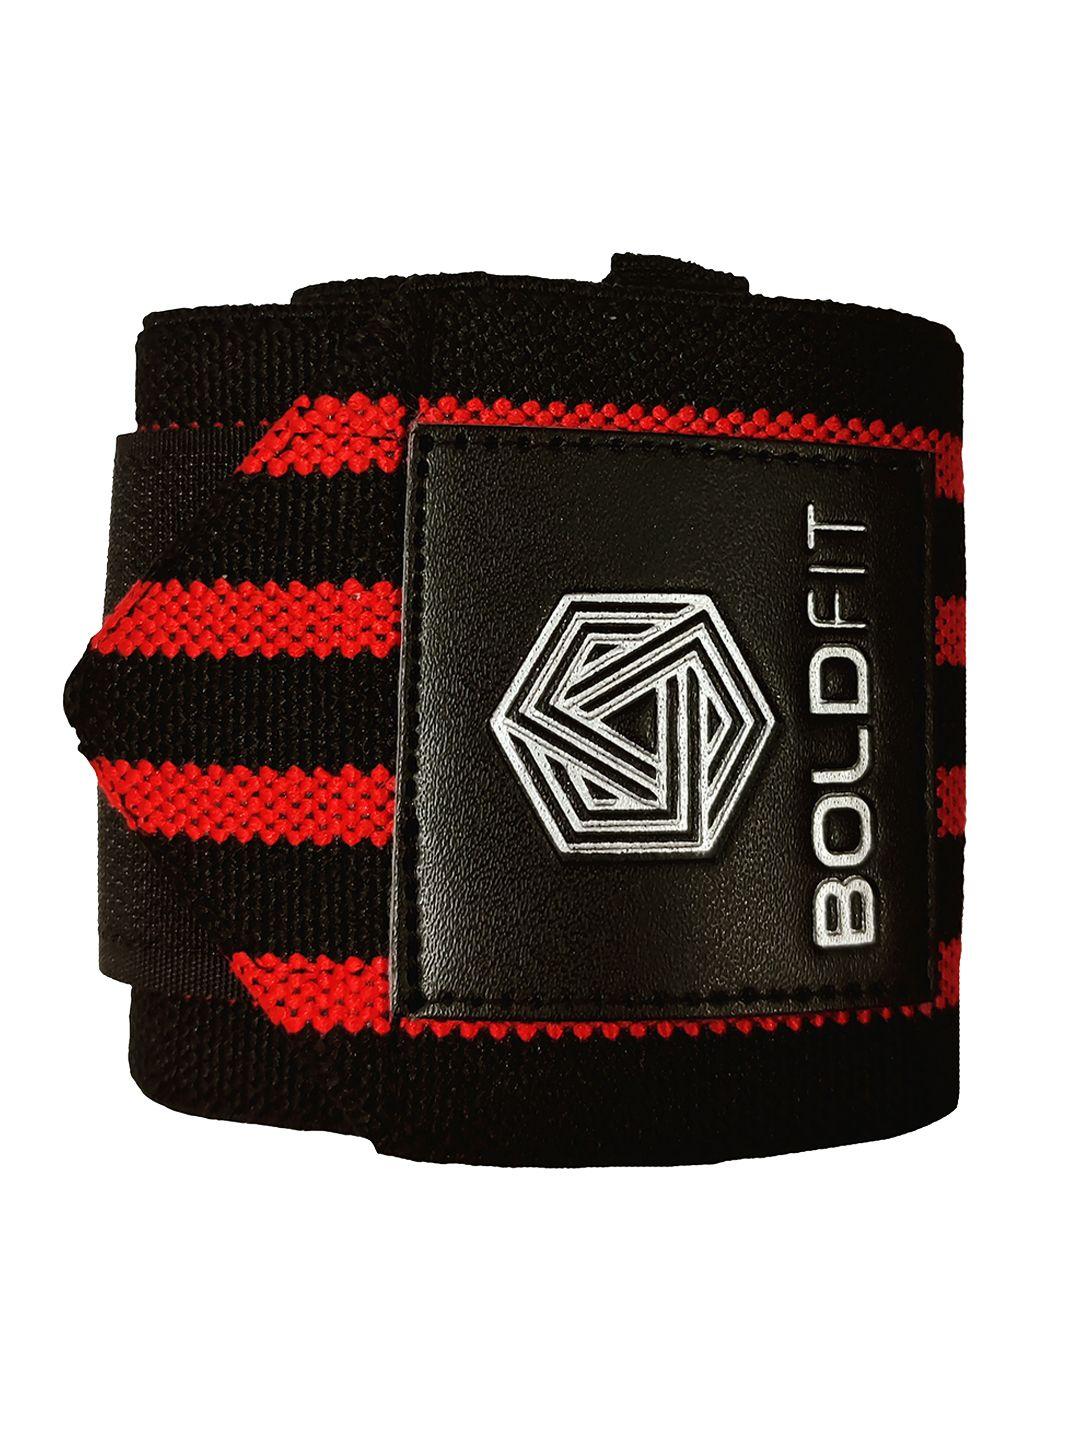 boldfit red & black striped wrist support band